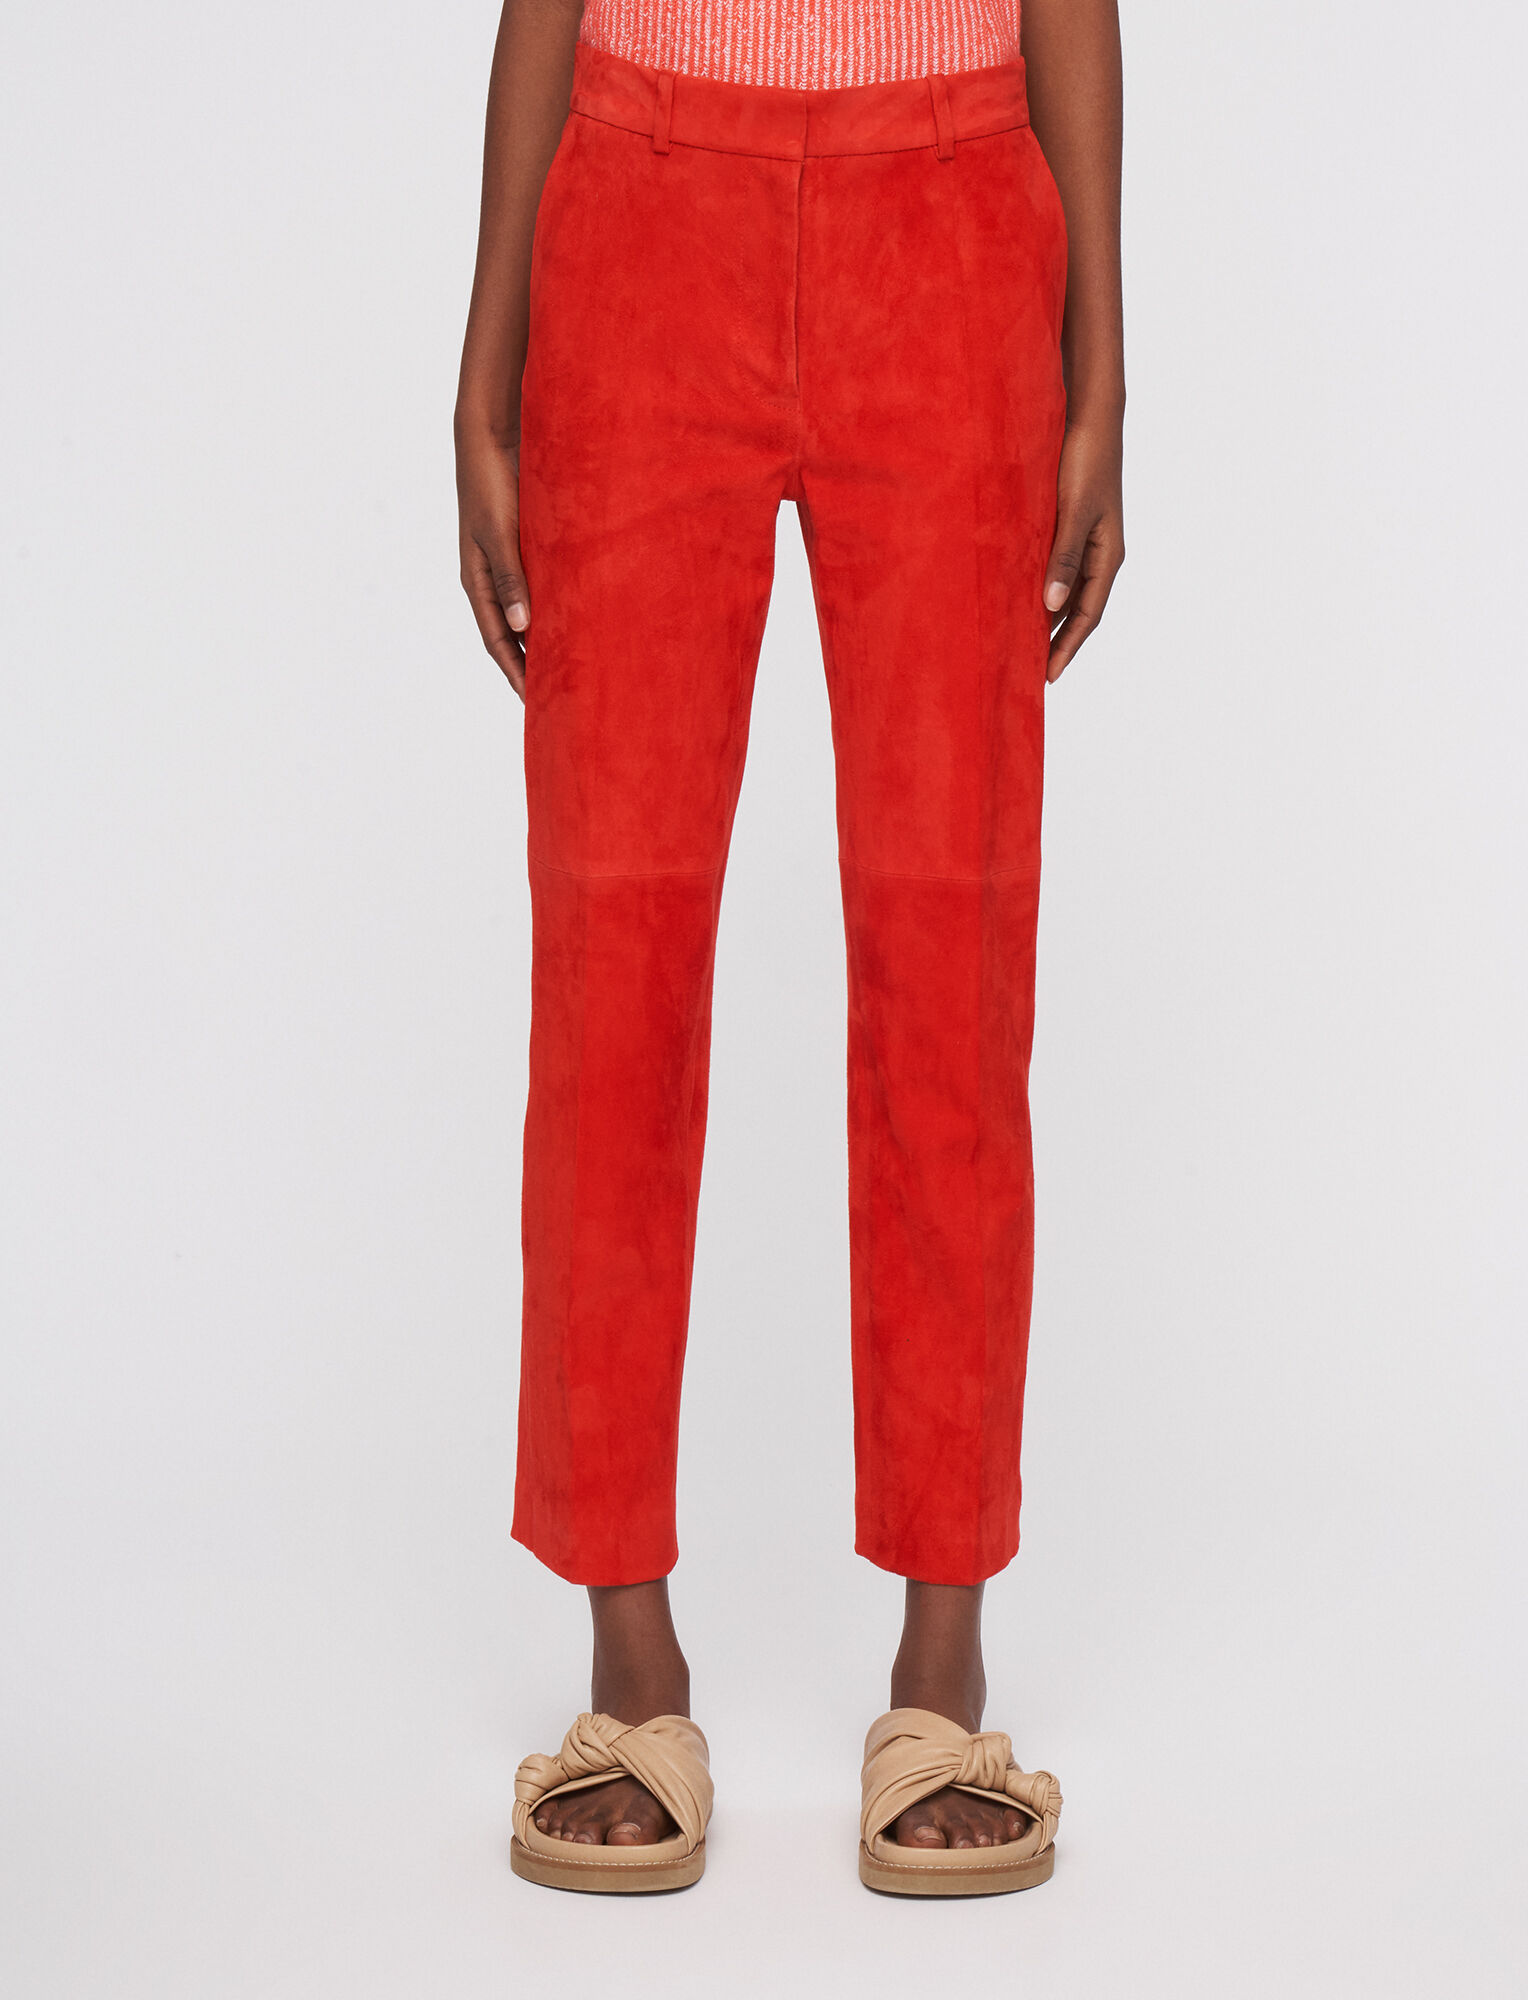 Joseph, Suede Stretch Coleman Trousers, in Scarlet